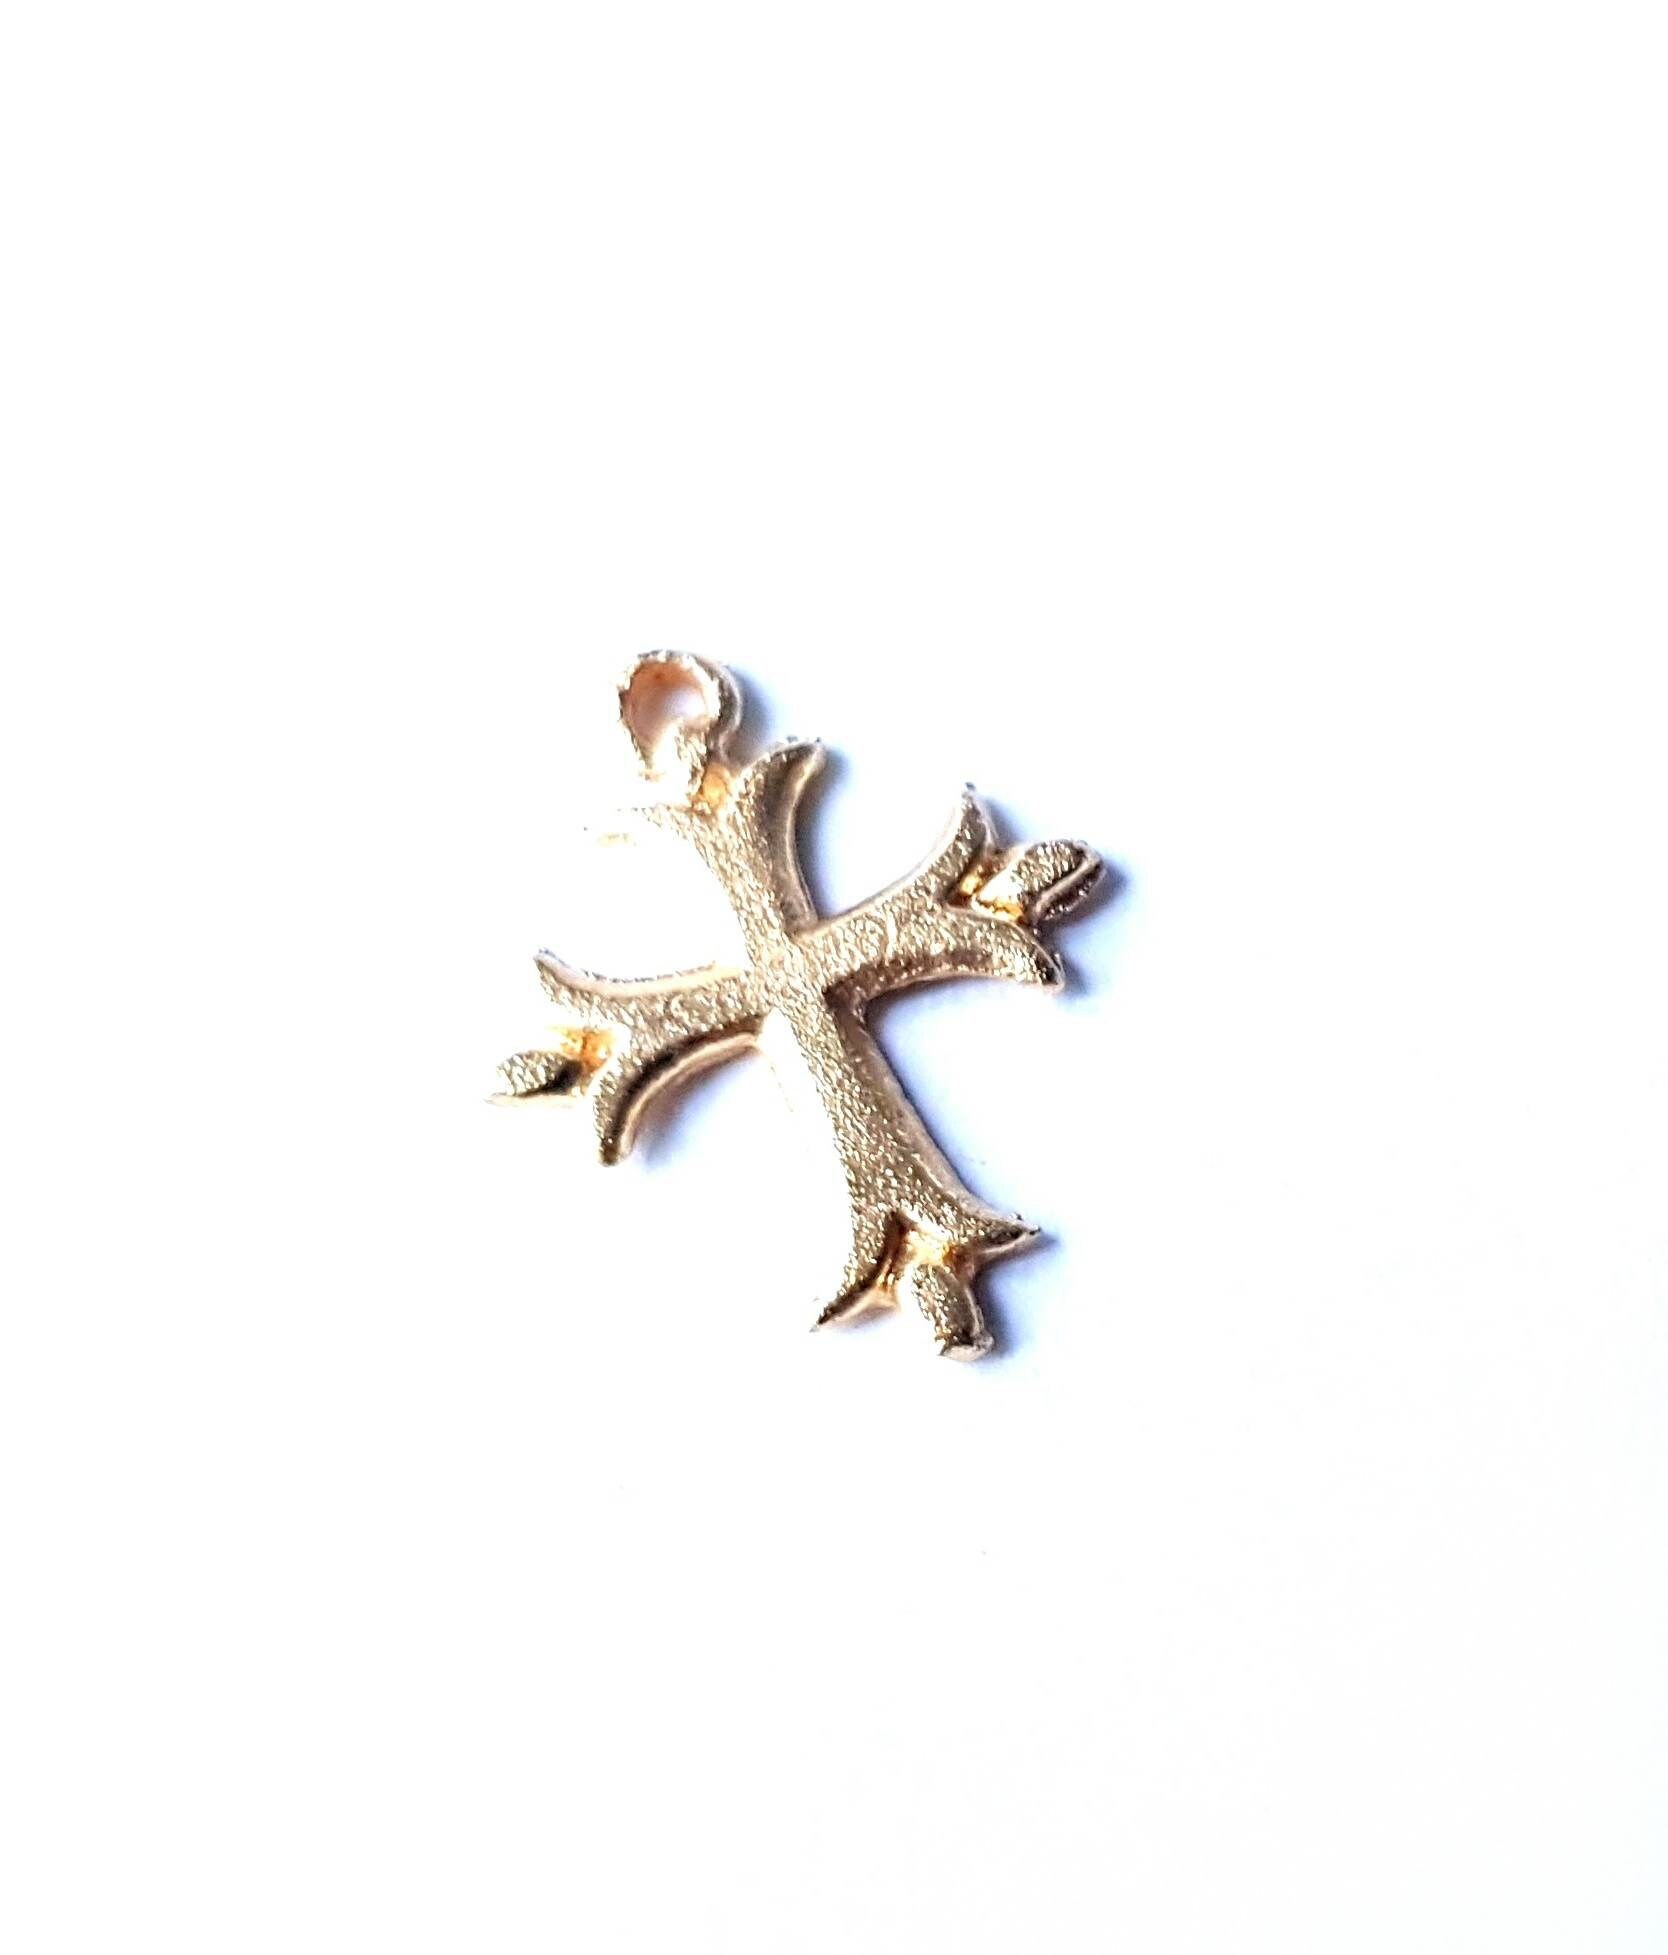 Dainty Cross Charms, Micro Pave Mini Cross, Religious Jewelry,14K Gold  Filled Cross Charm Add on Pendant N-409